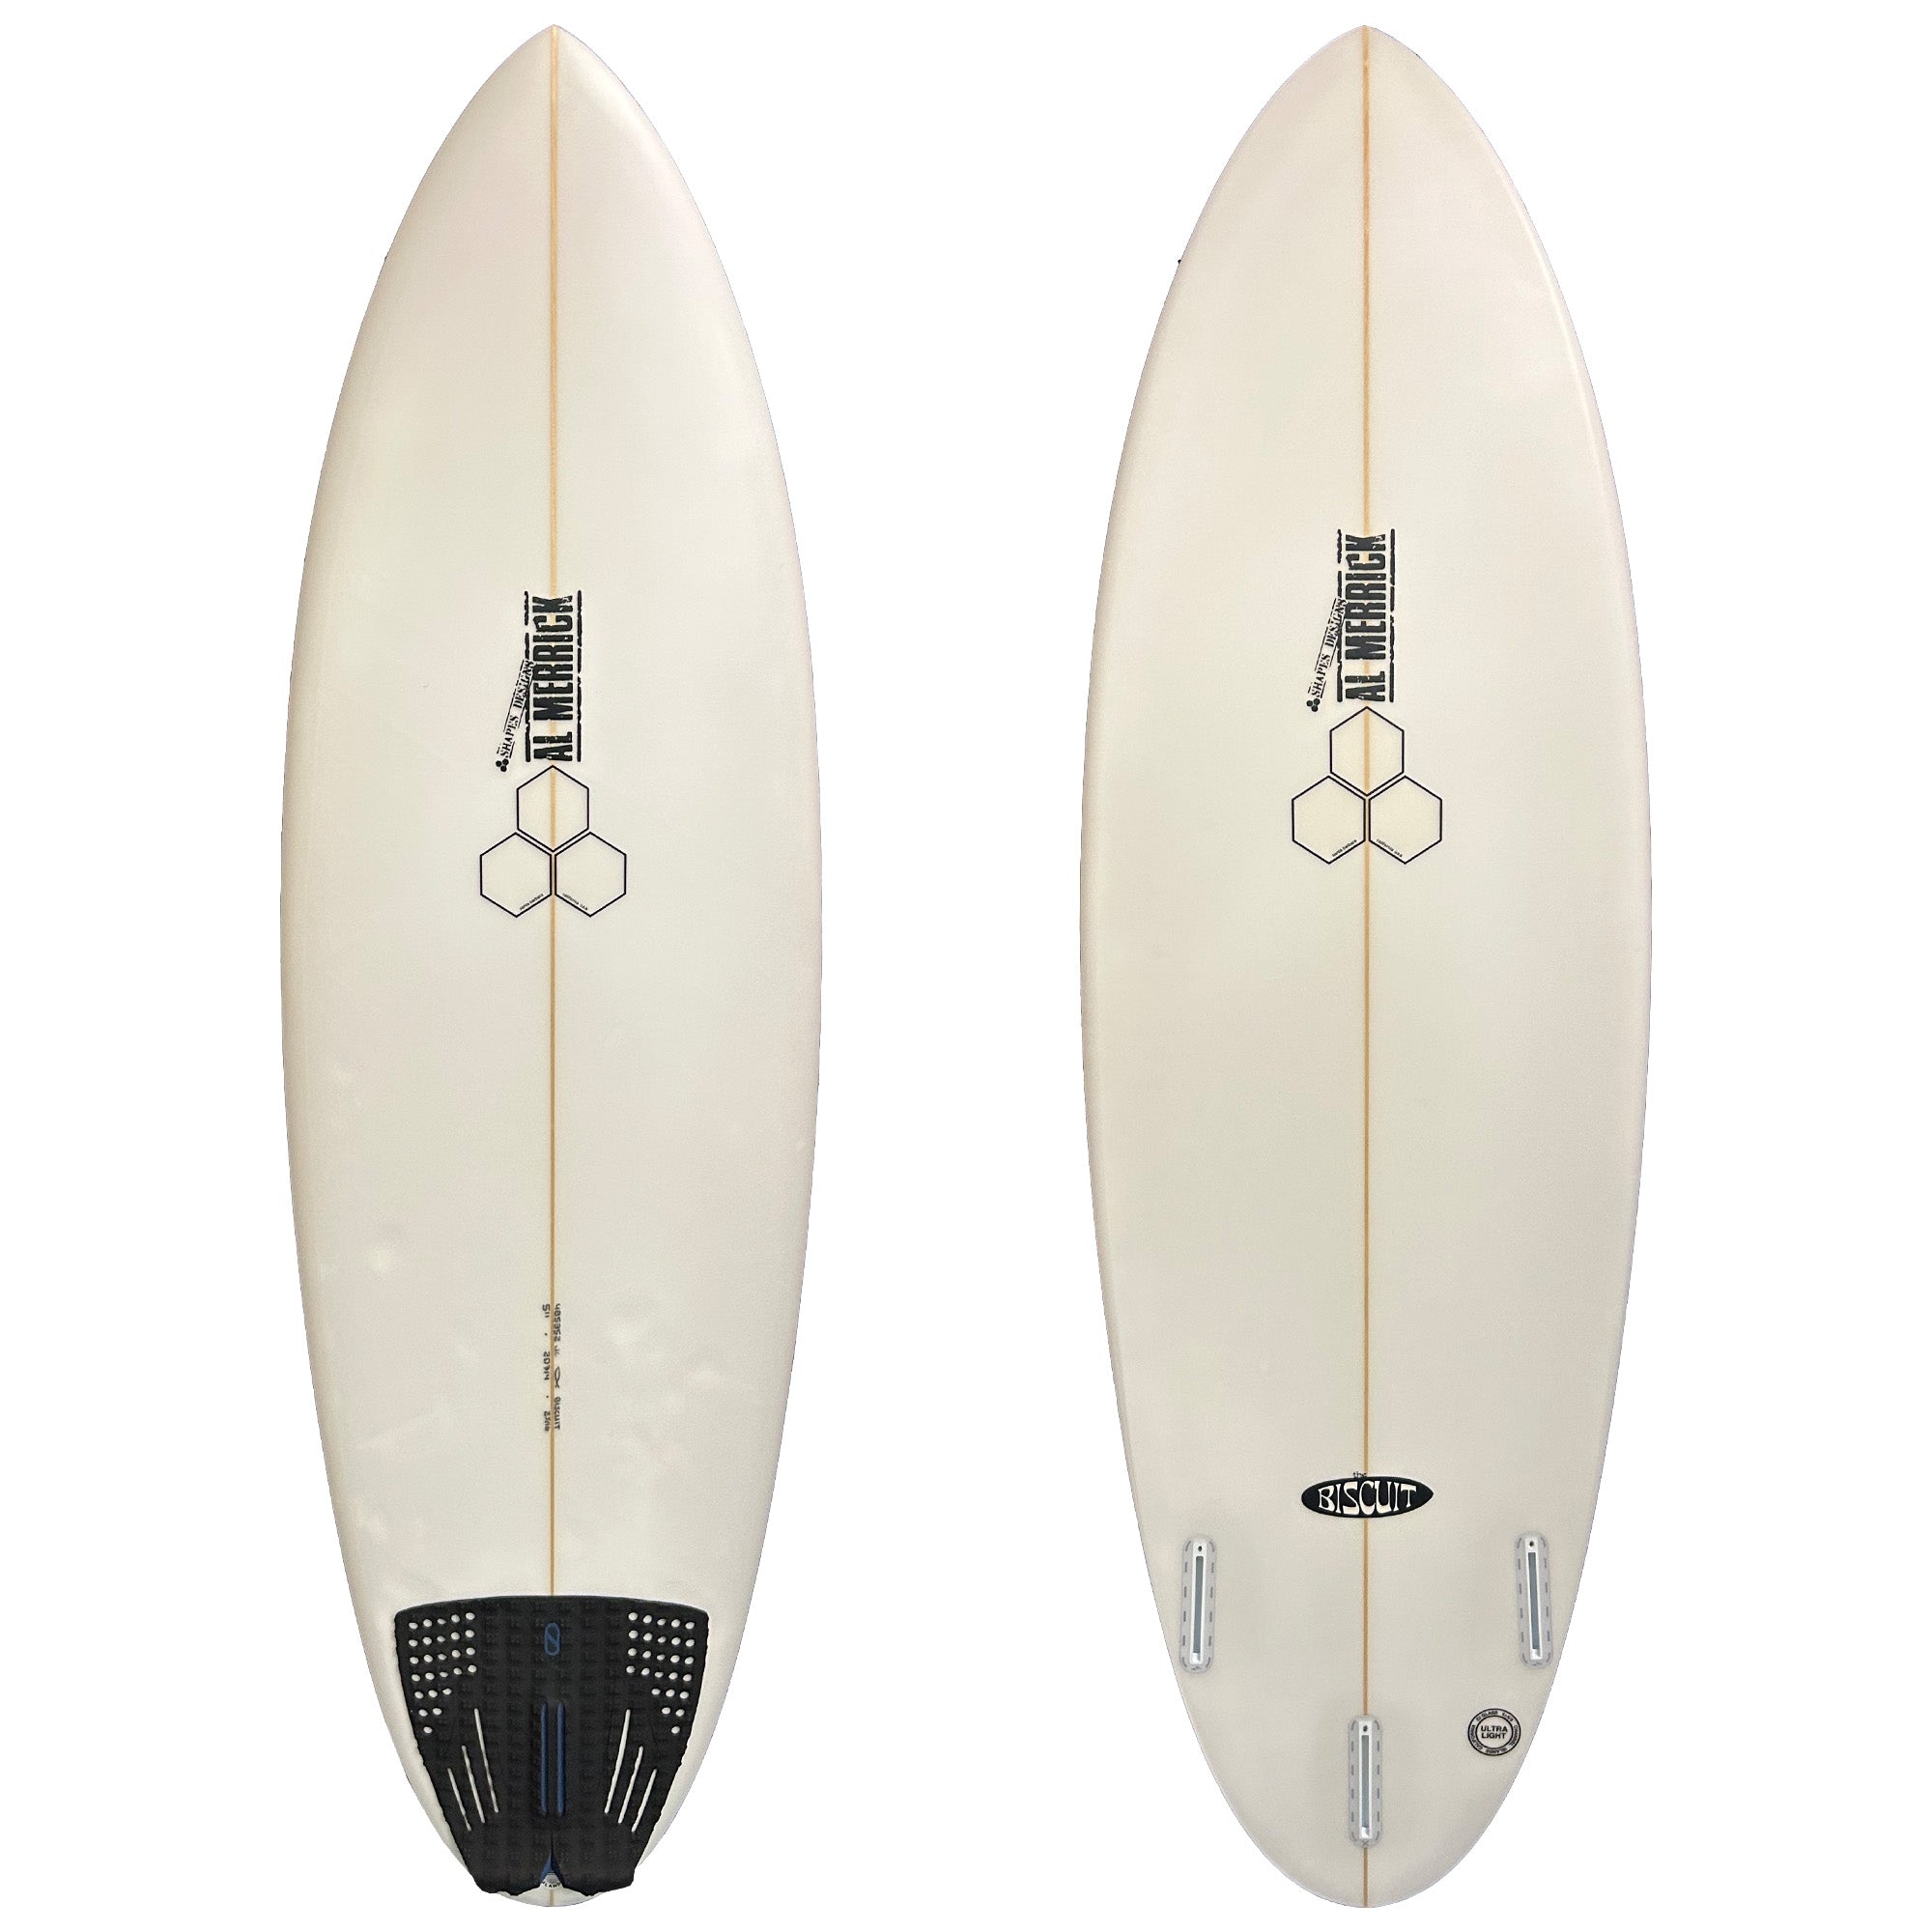 Channel Islands Biscuit 5'11 Consignment Surfboard